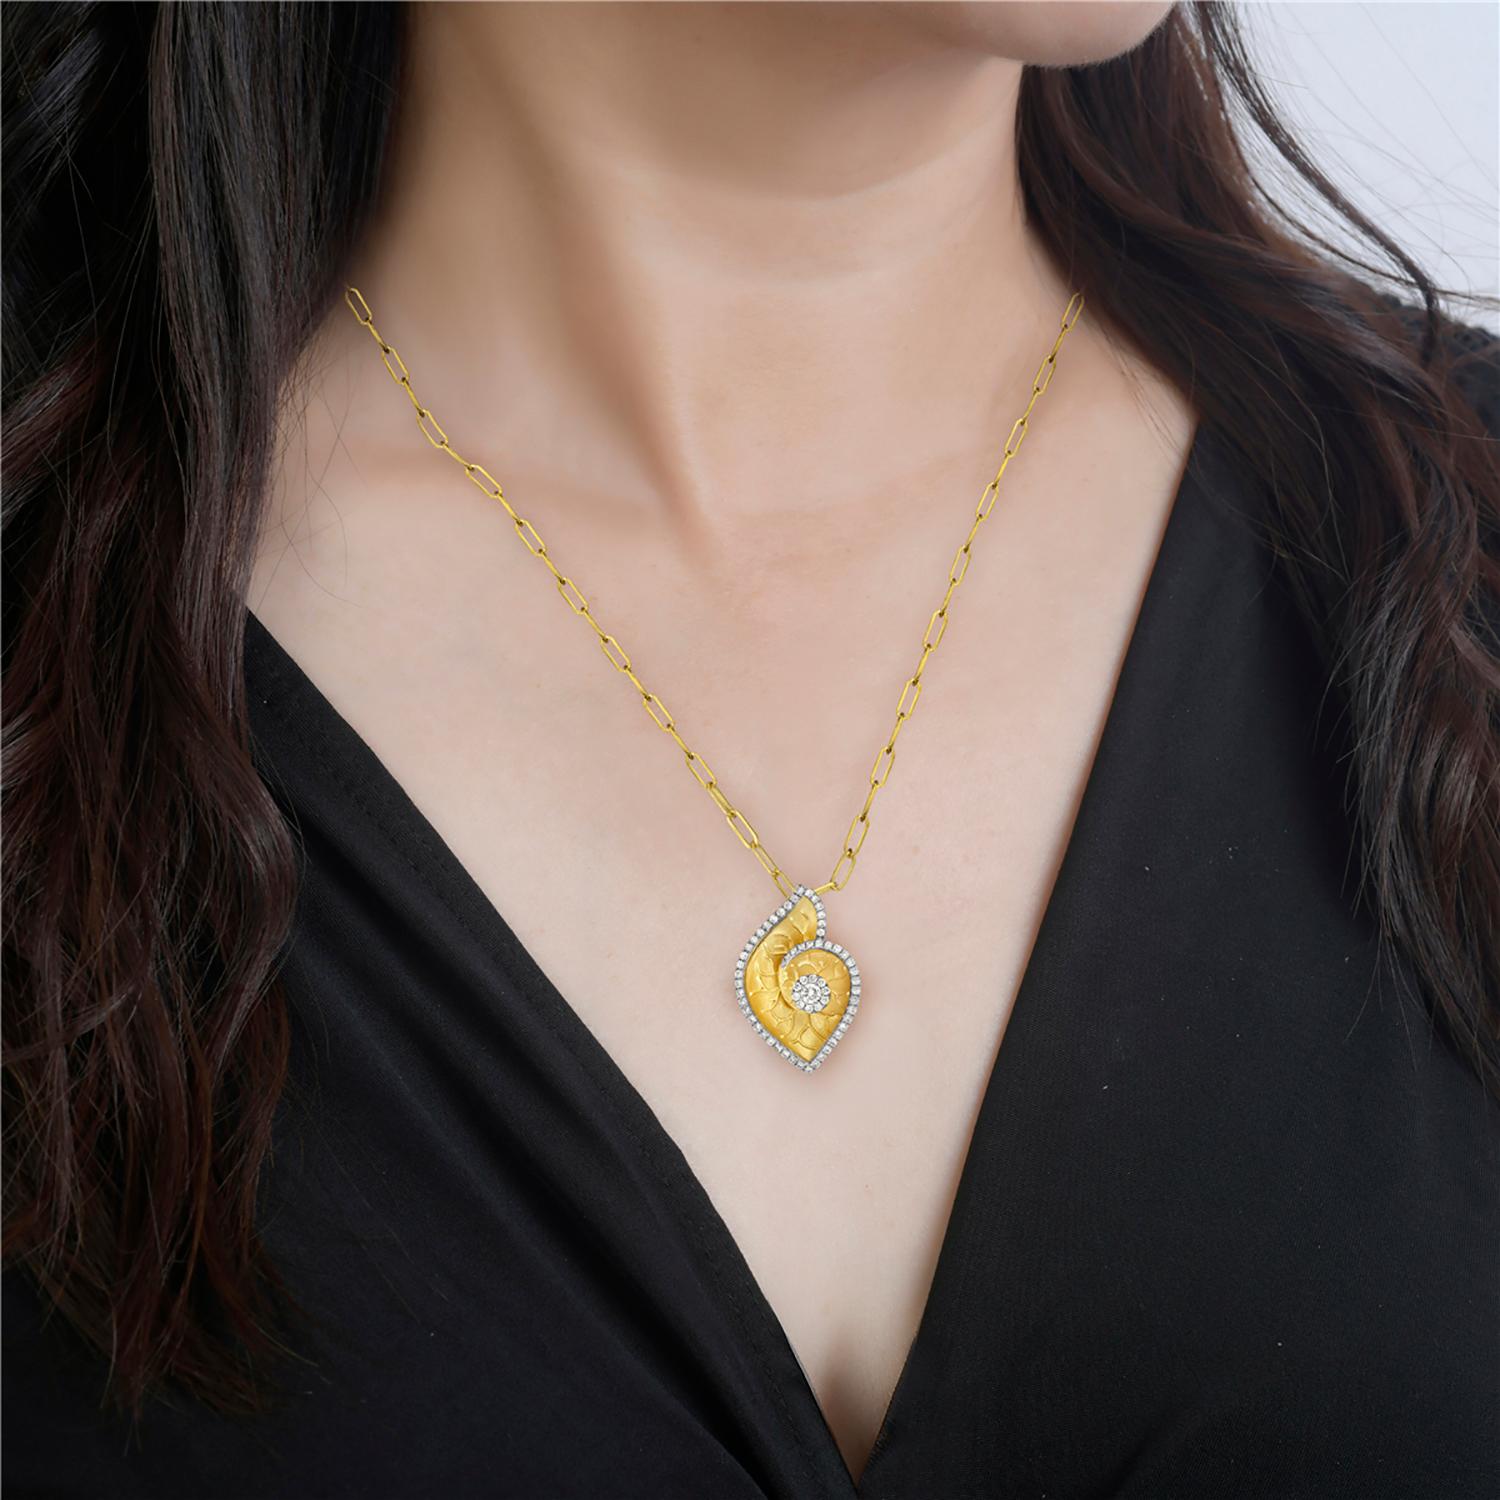 Introducing our exquisite Shell Shaped Carved Pendant, expertly crafted from 14k yellow gold and bordered with pave diamonds. This stunning pendant is inspired by the natural curves and shapes of a seashell, with intricate detailing that captures